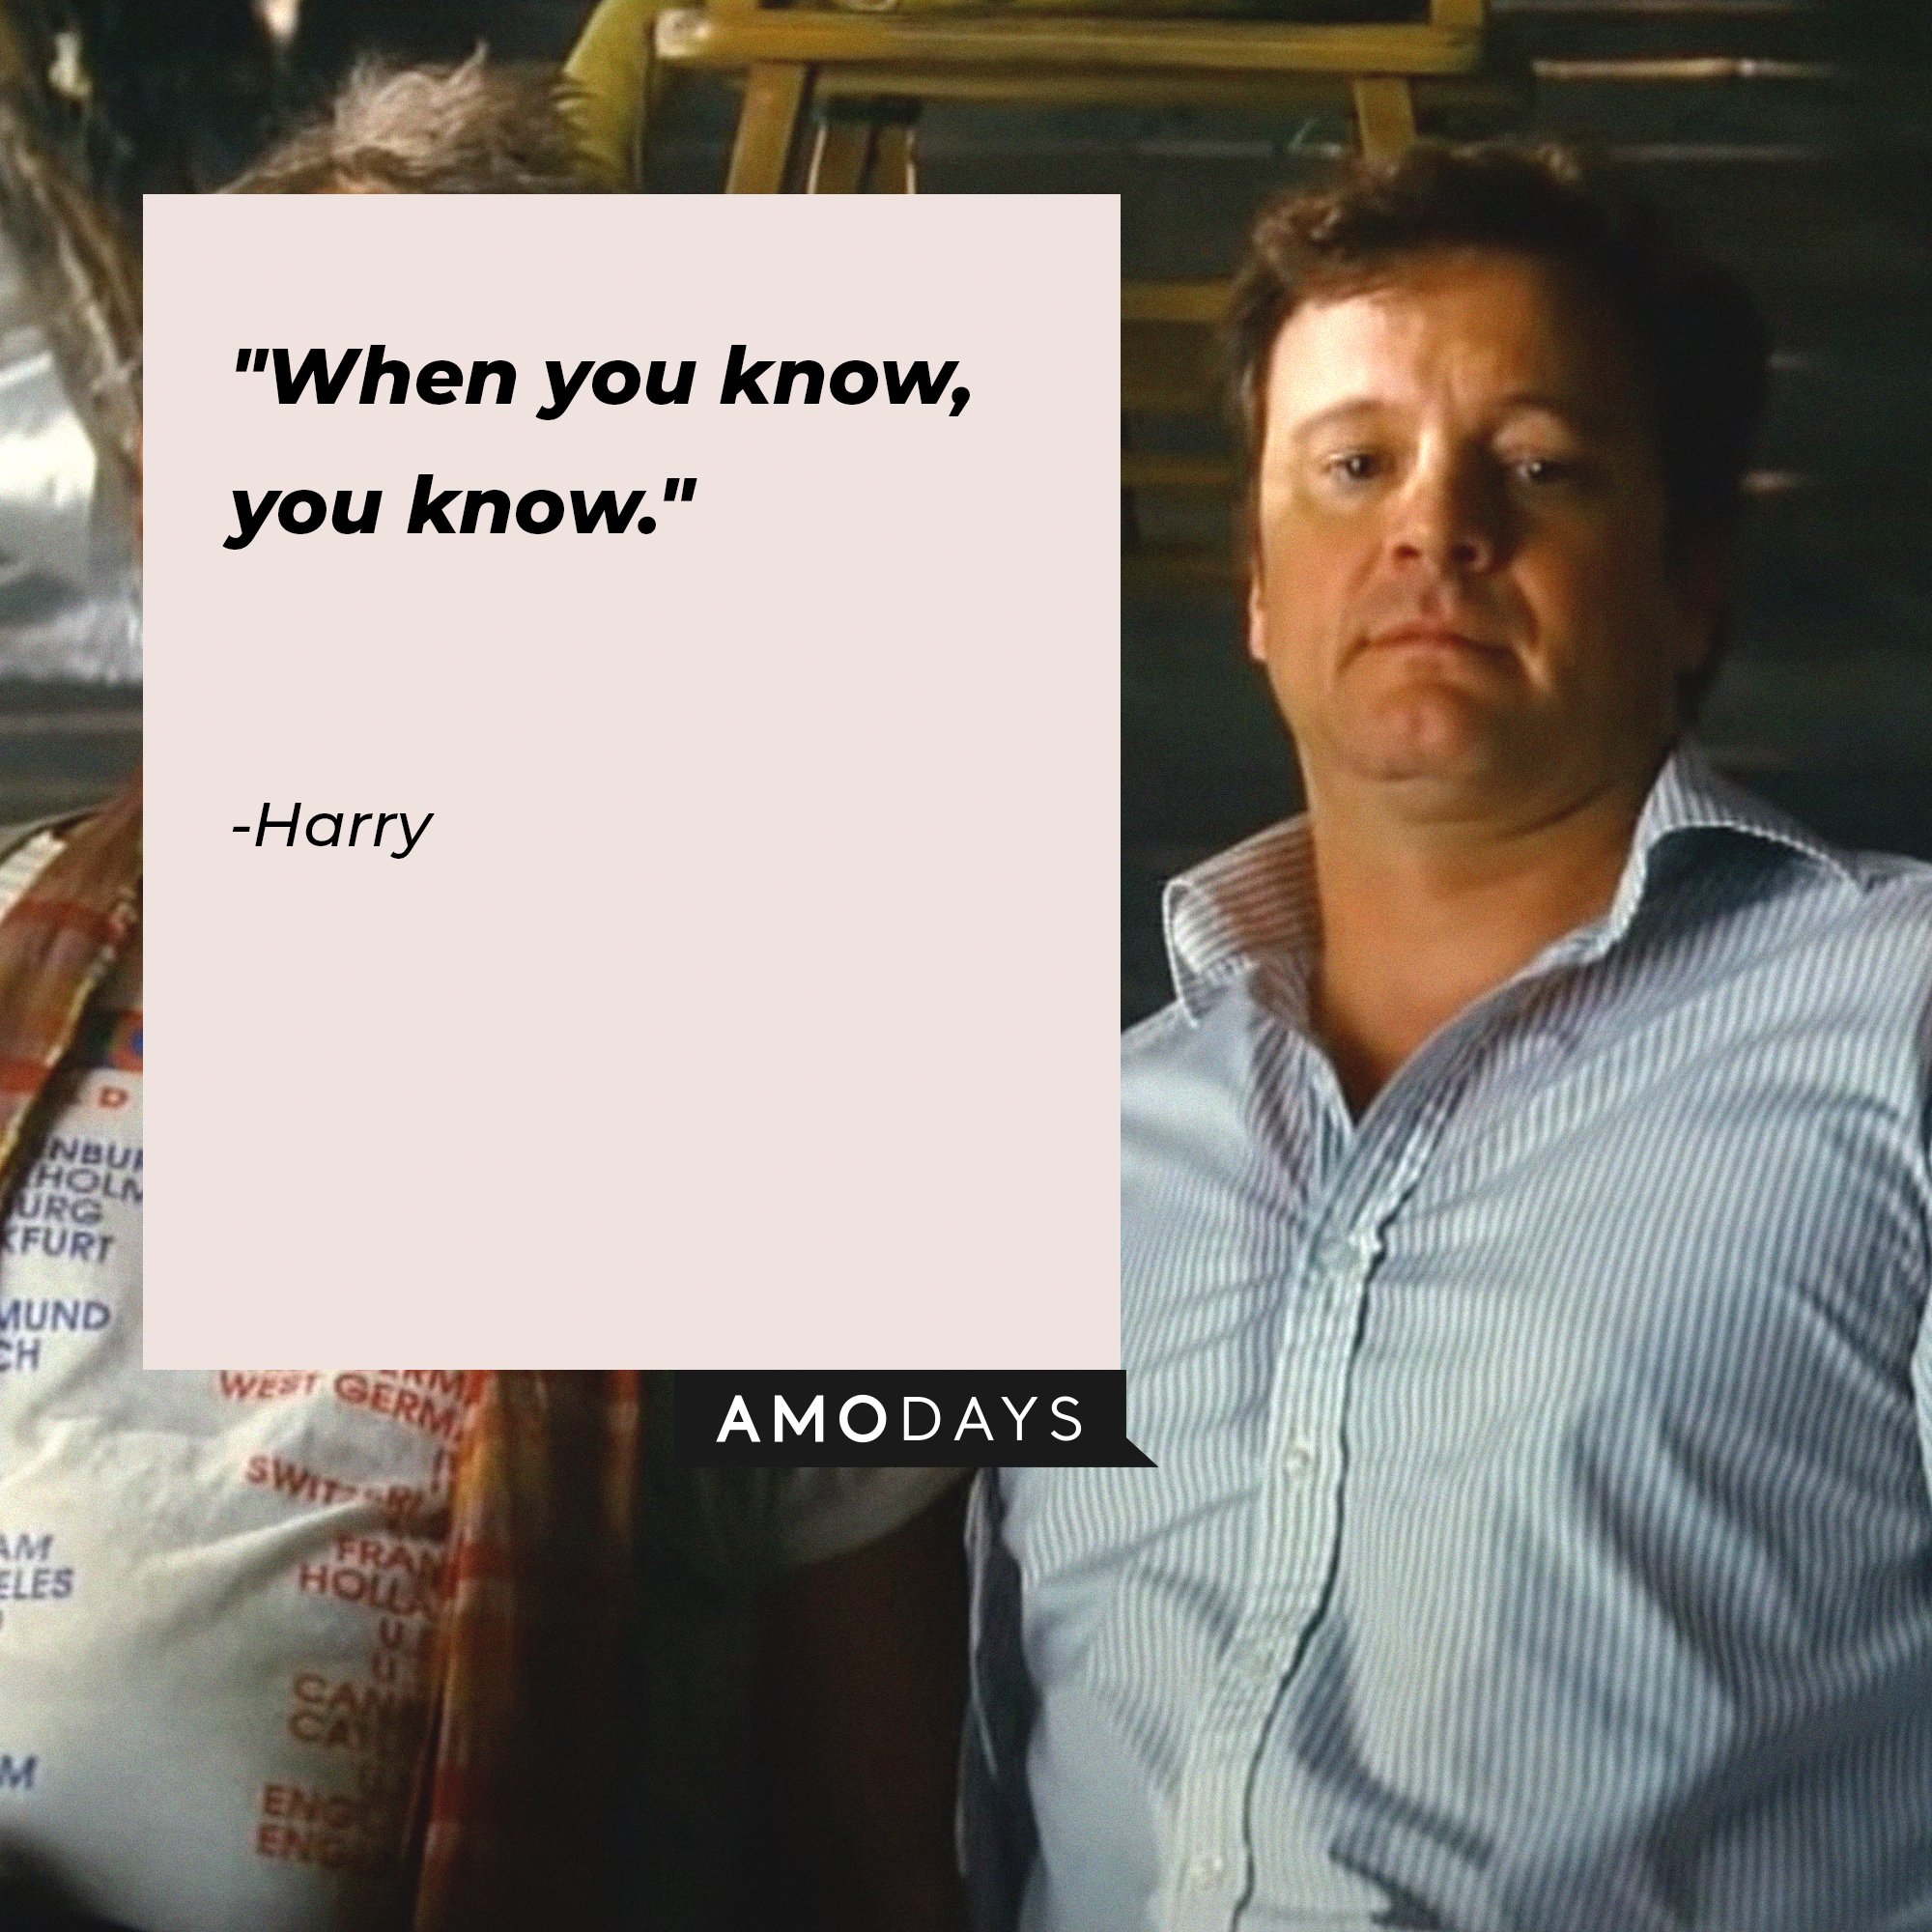 Harry's quote: "When you know, you know." | Image: AmoDays